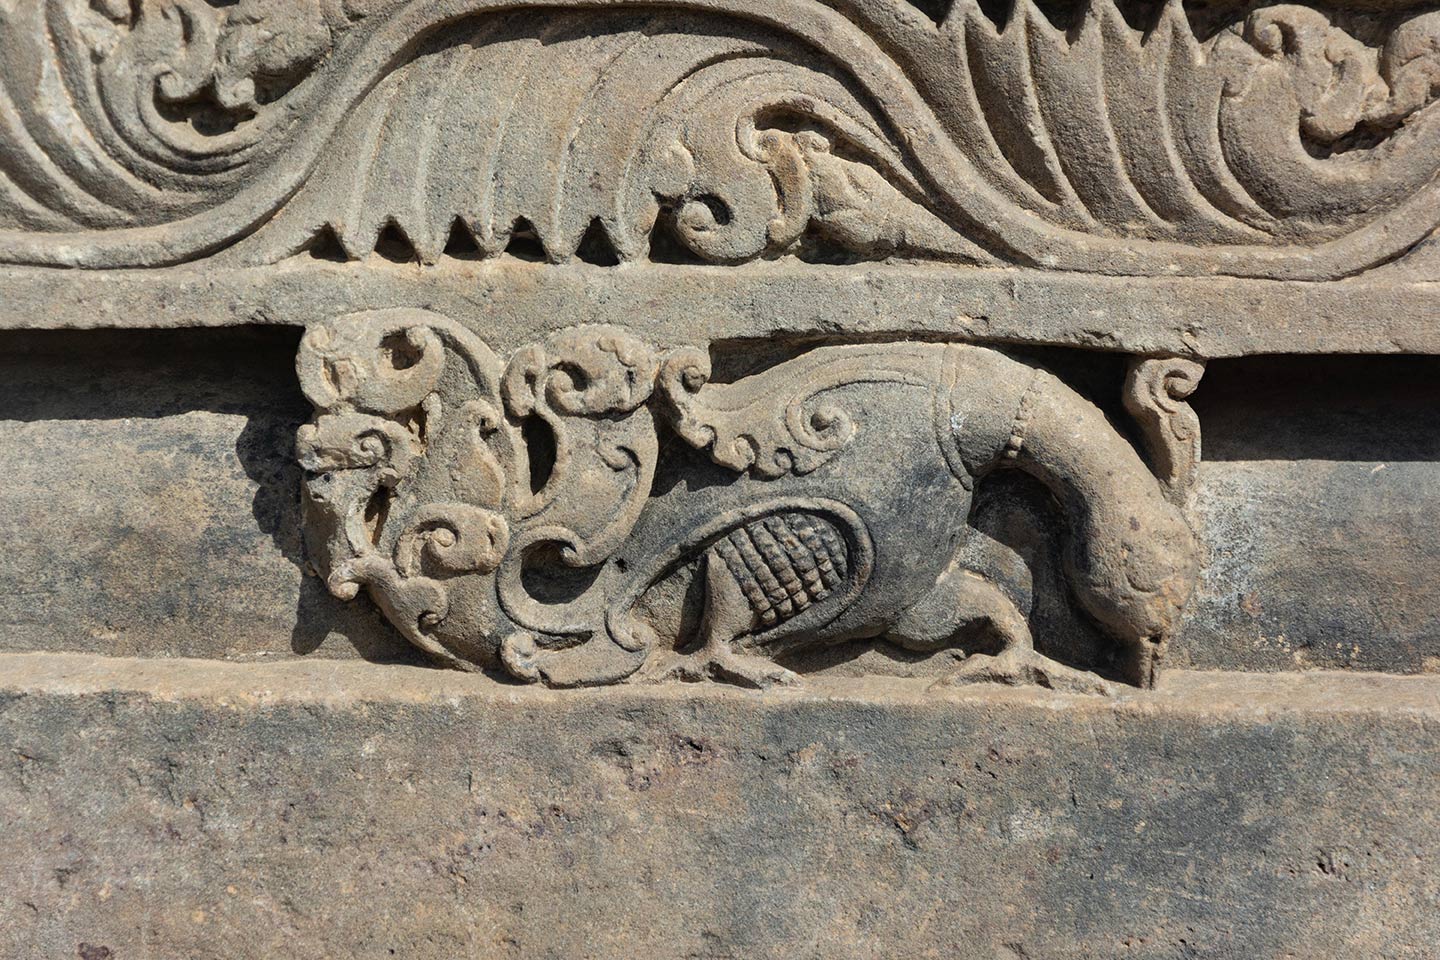 Bas relief of a peacock picking the food from the ground. A ring is placed on the neck of the bird.